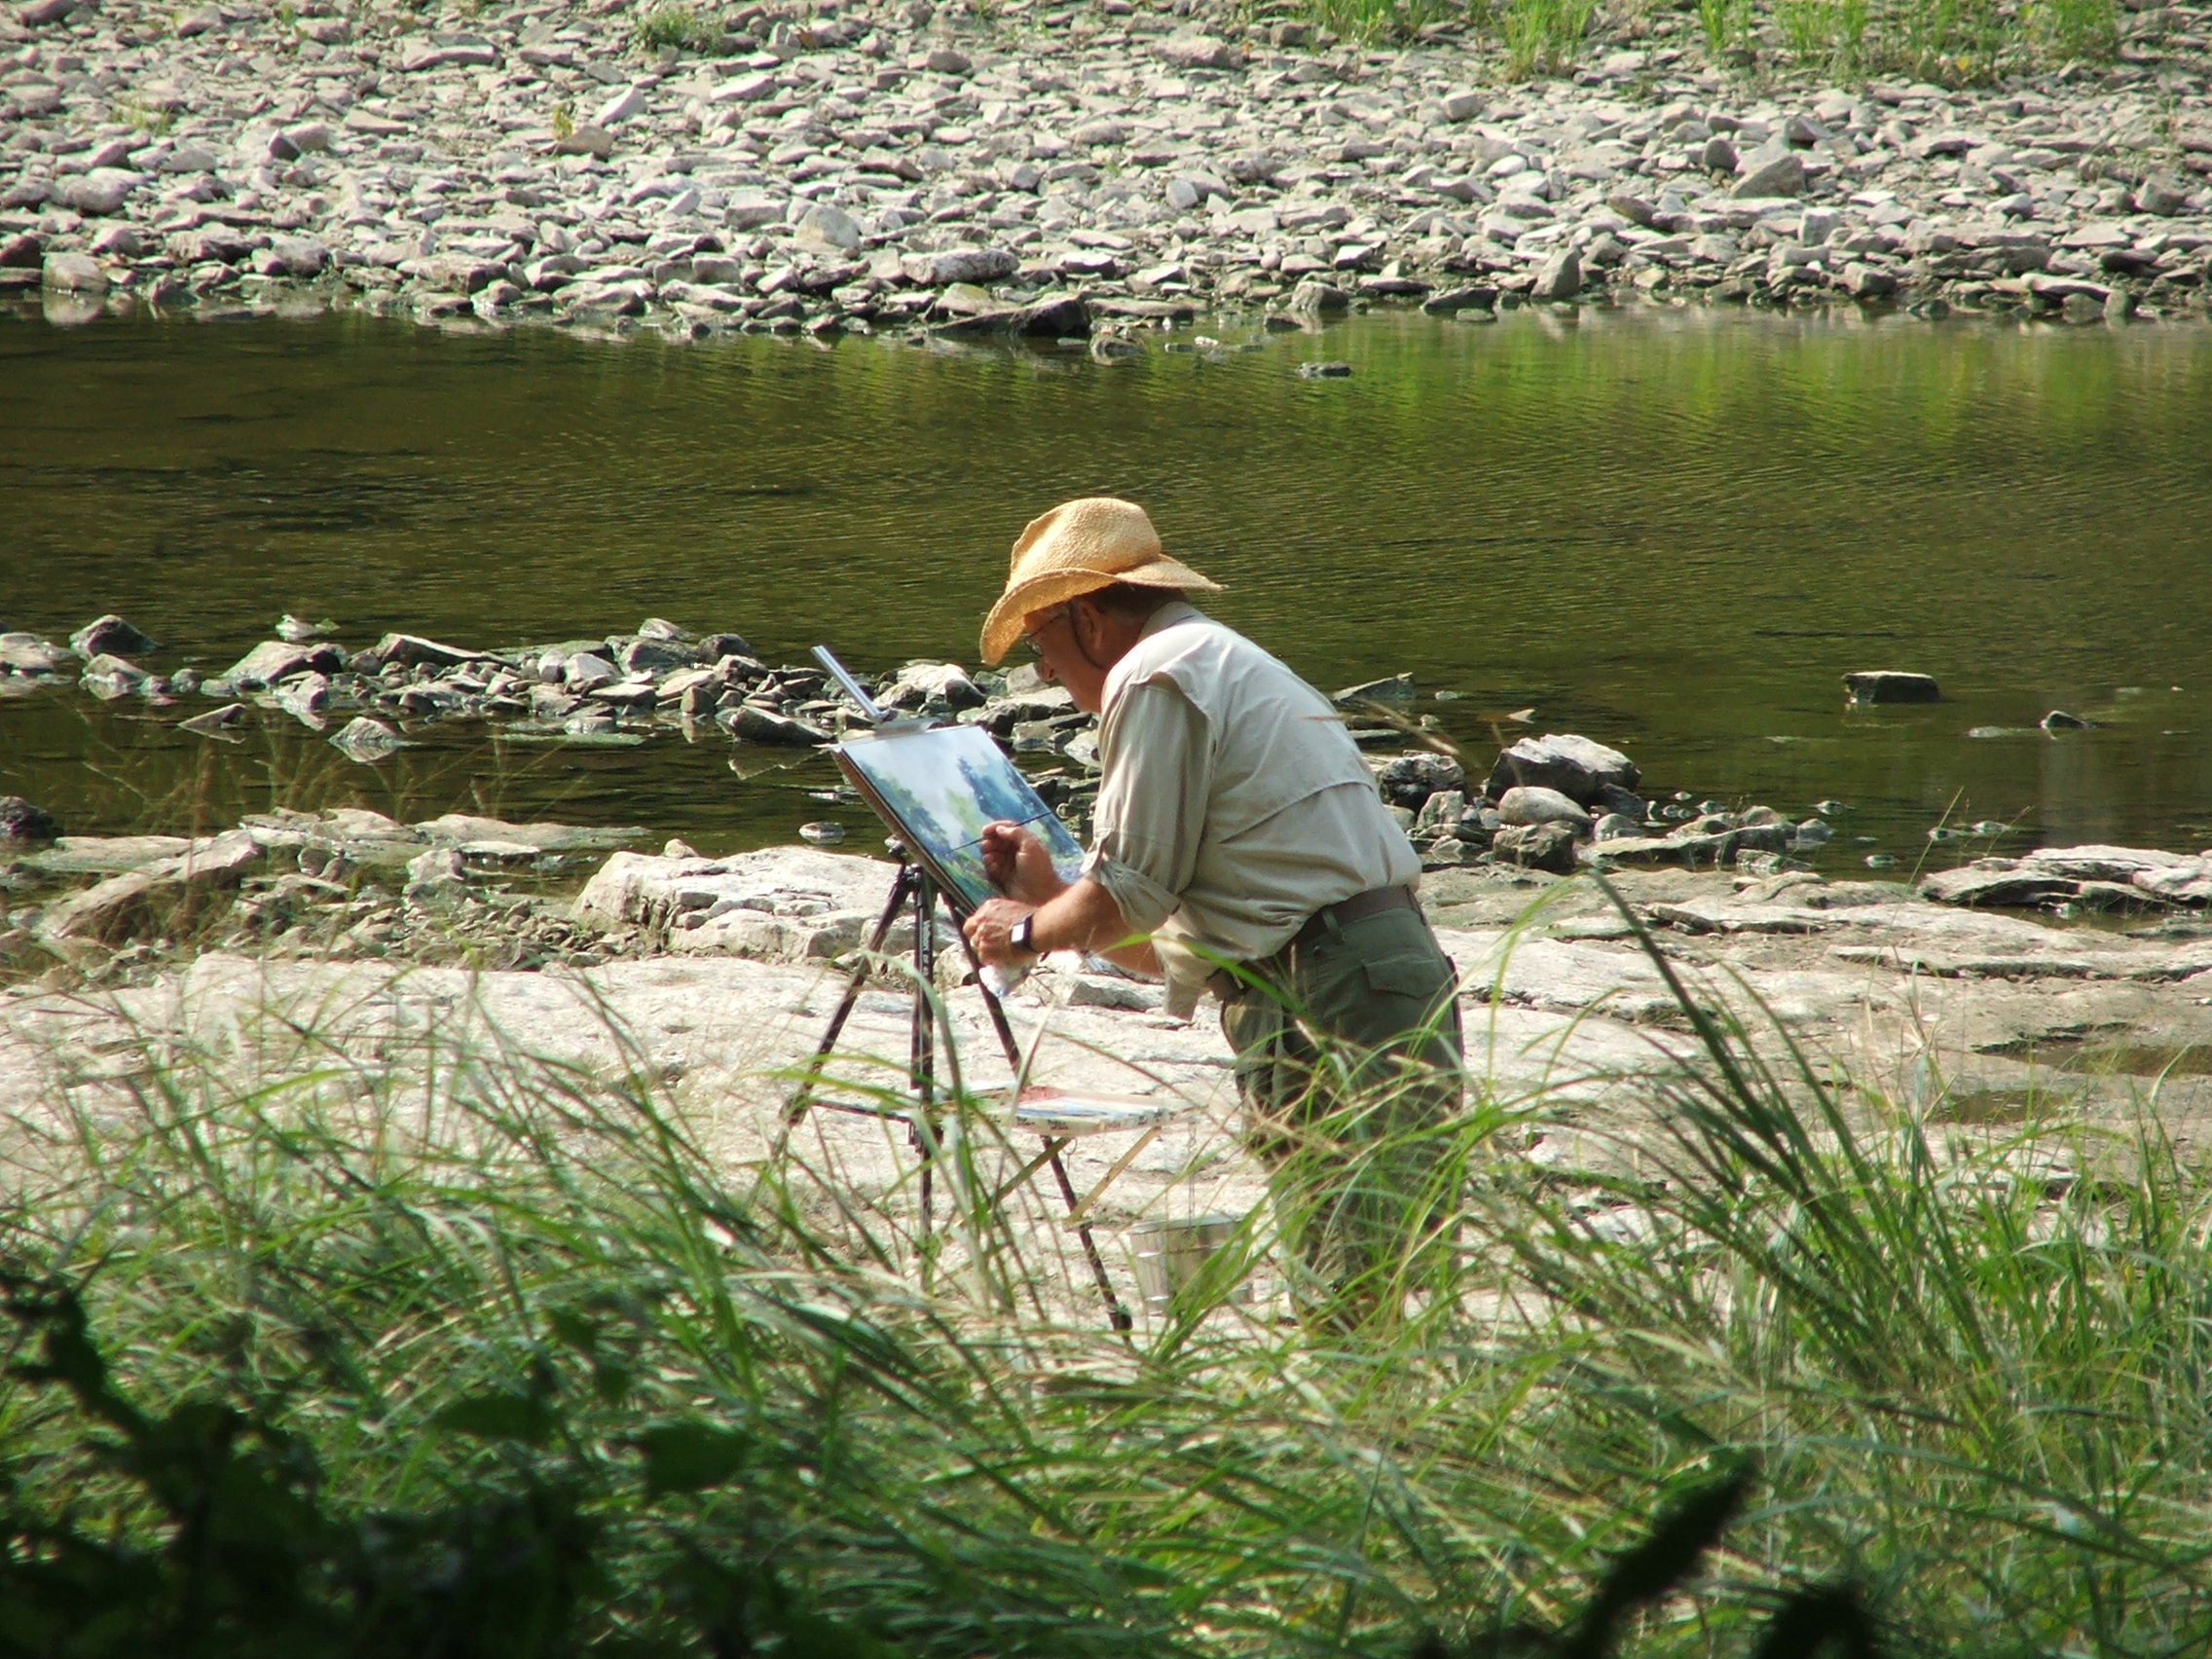 Maumee River - Maumee, Ohio - Monday Morning Painters